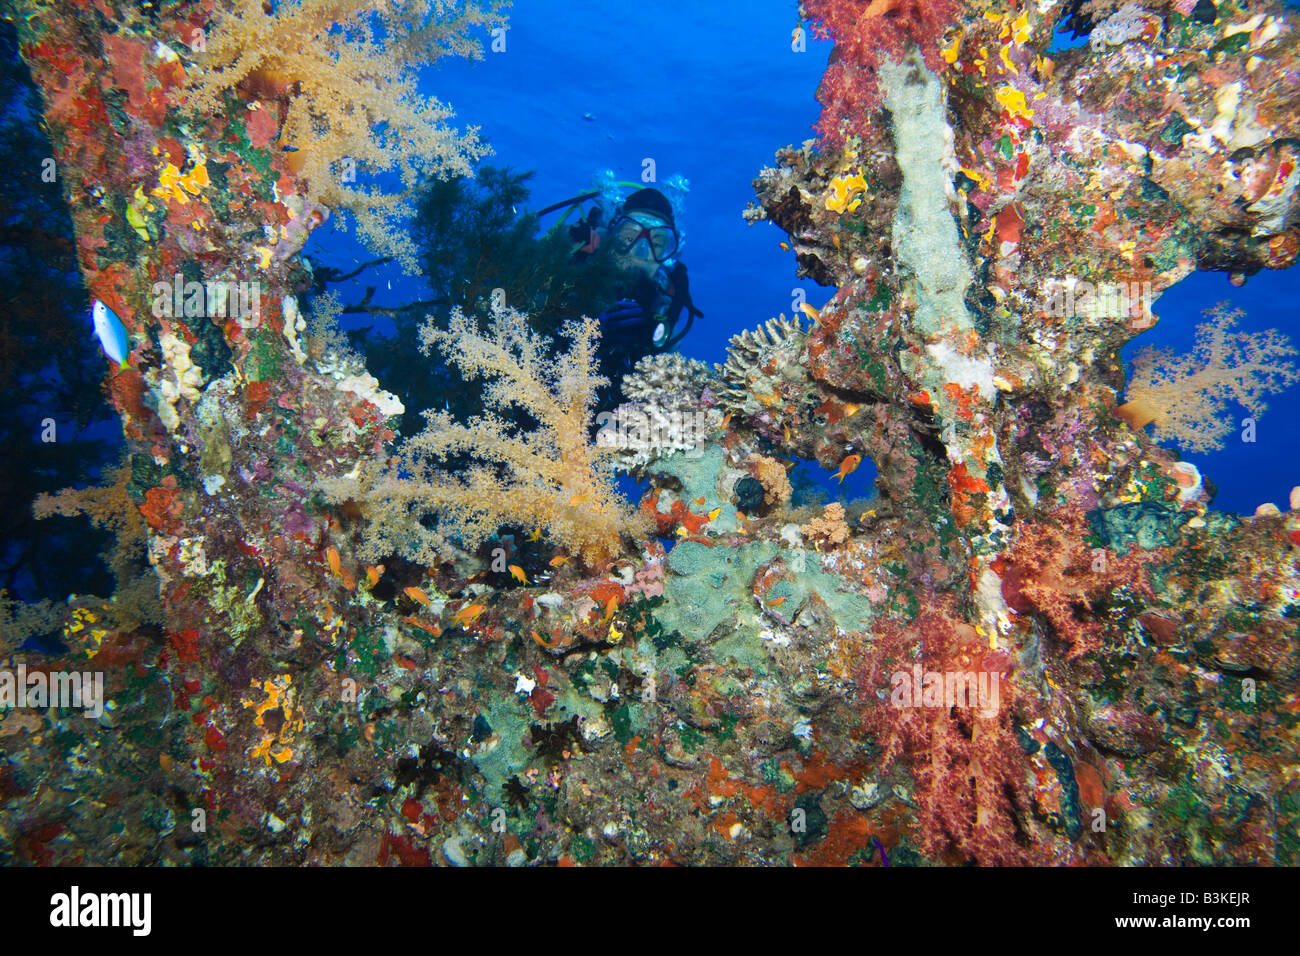 A scuba diver shines her torch on the beautiful soft corals that adorn the SS Carnatic shipwreck at Sha'ab Abu Nuhas, Red Sea. Stock Photo